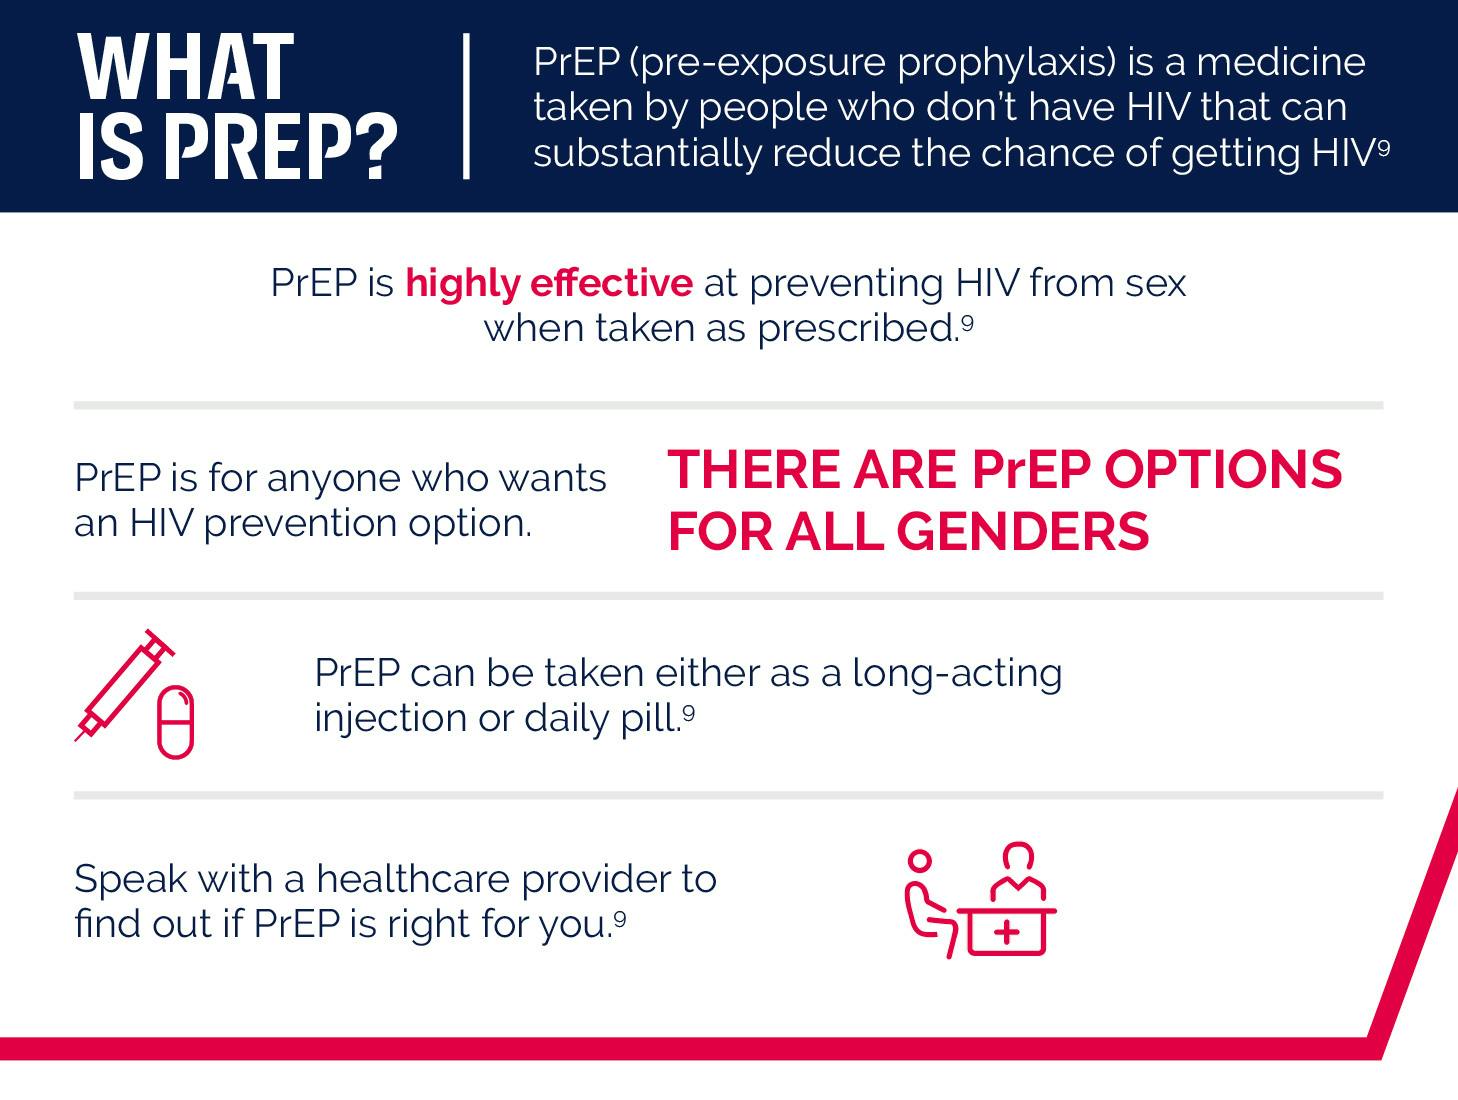 WHAT IS PREP?